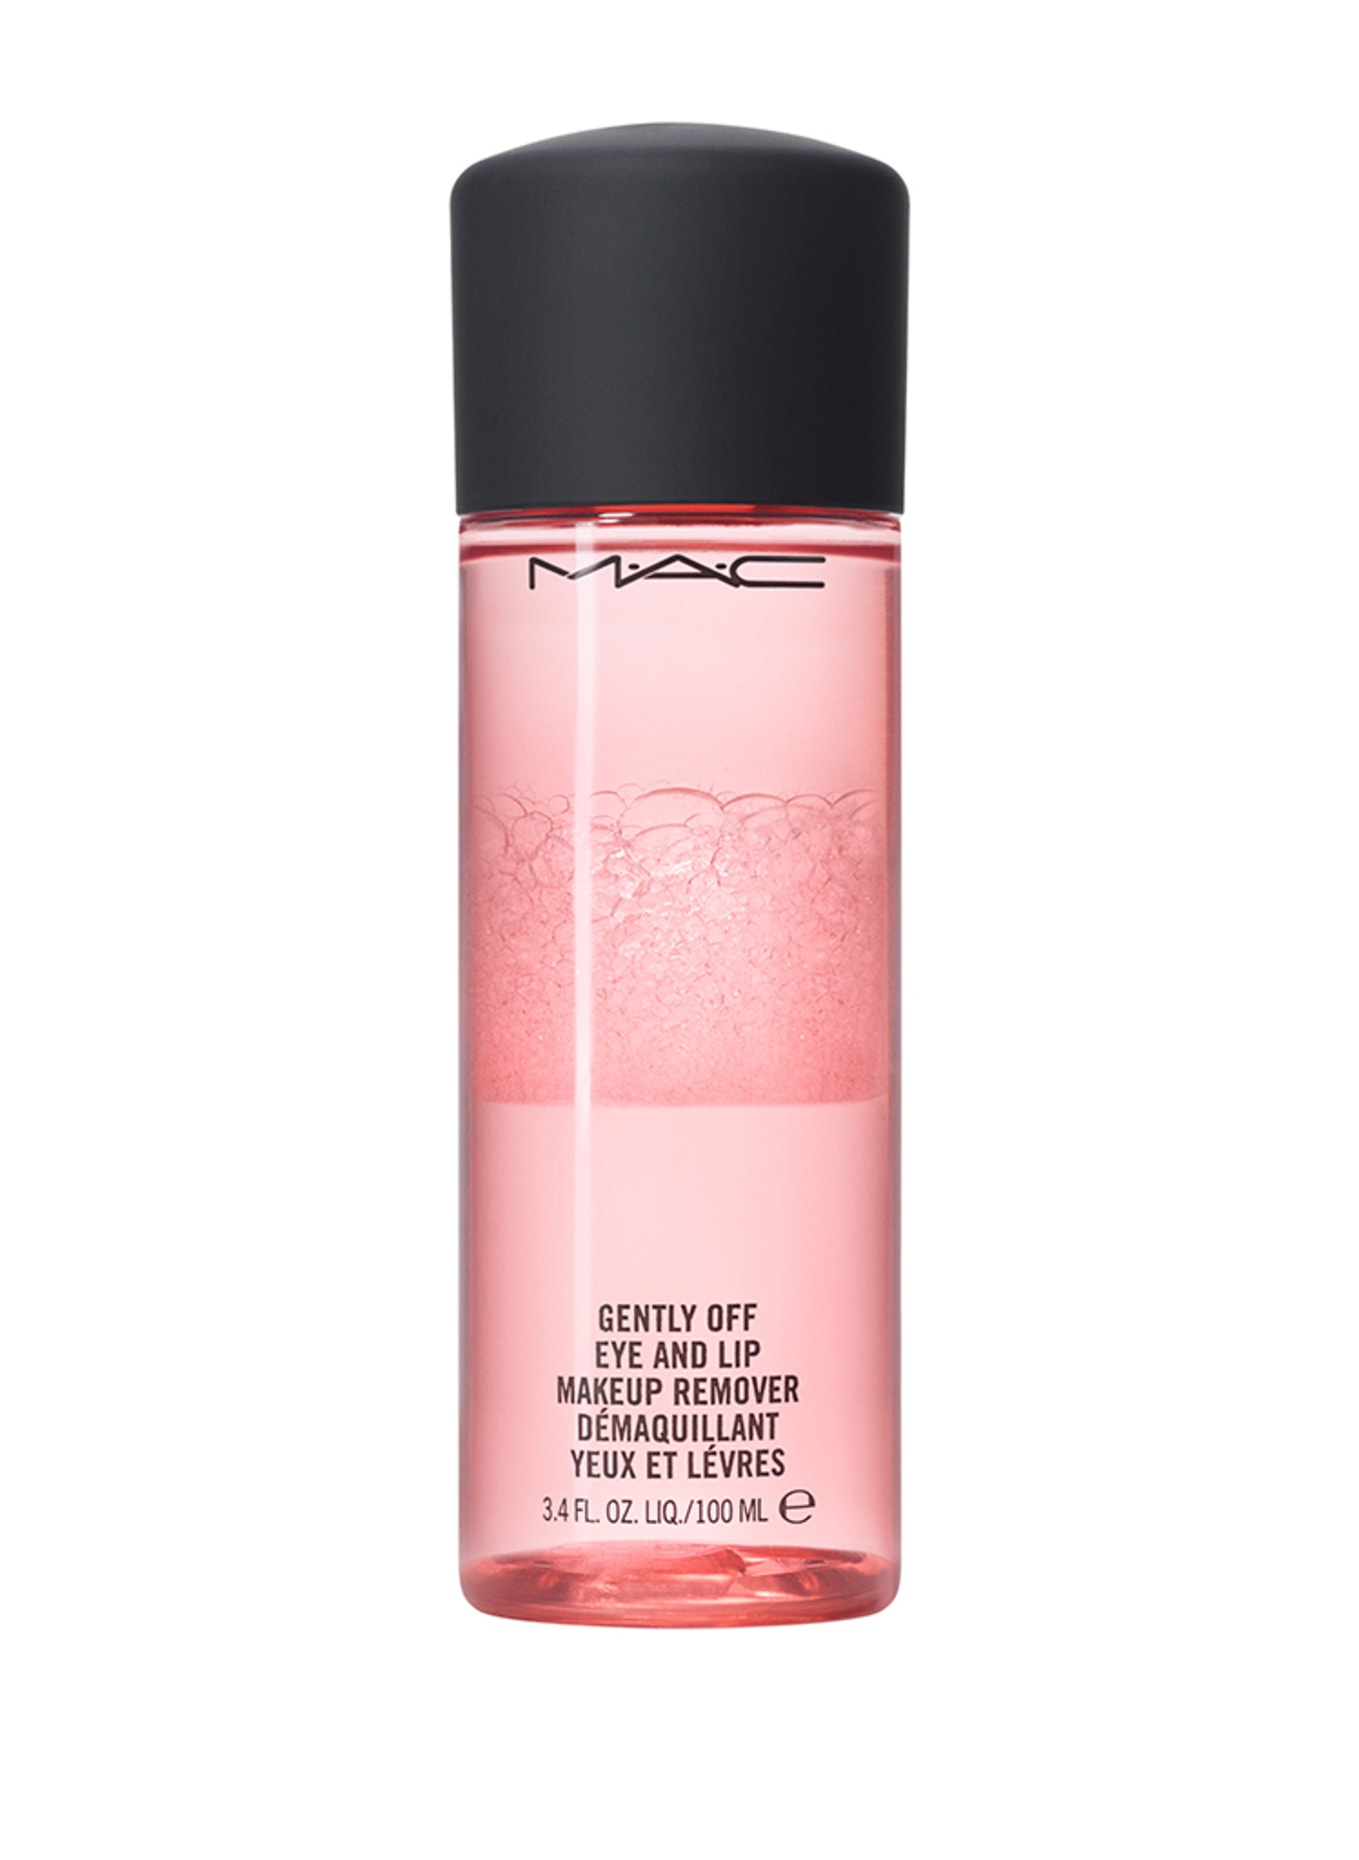 M.A.C GENTLY OFF EYE AND LIP MAKEUP REMOVER  (Obrázek 1)